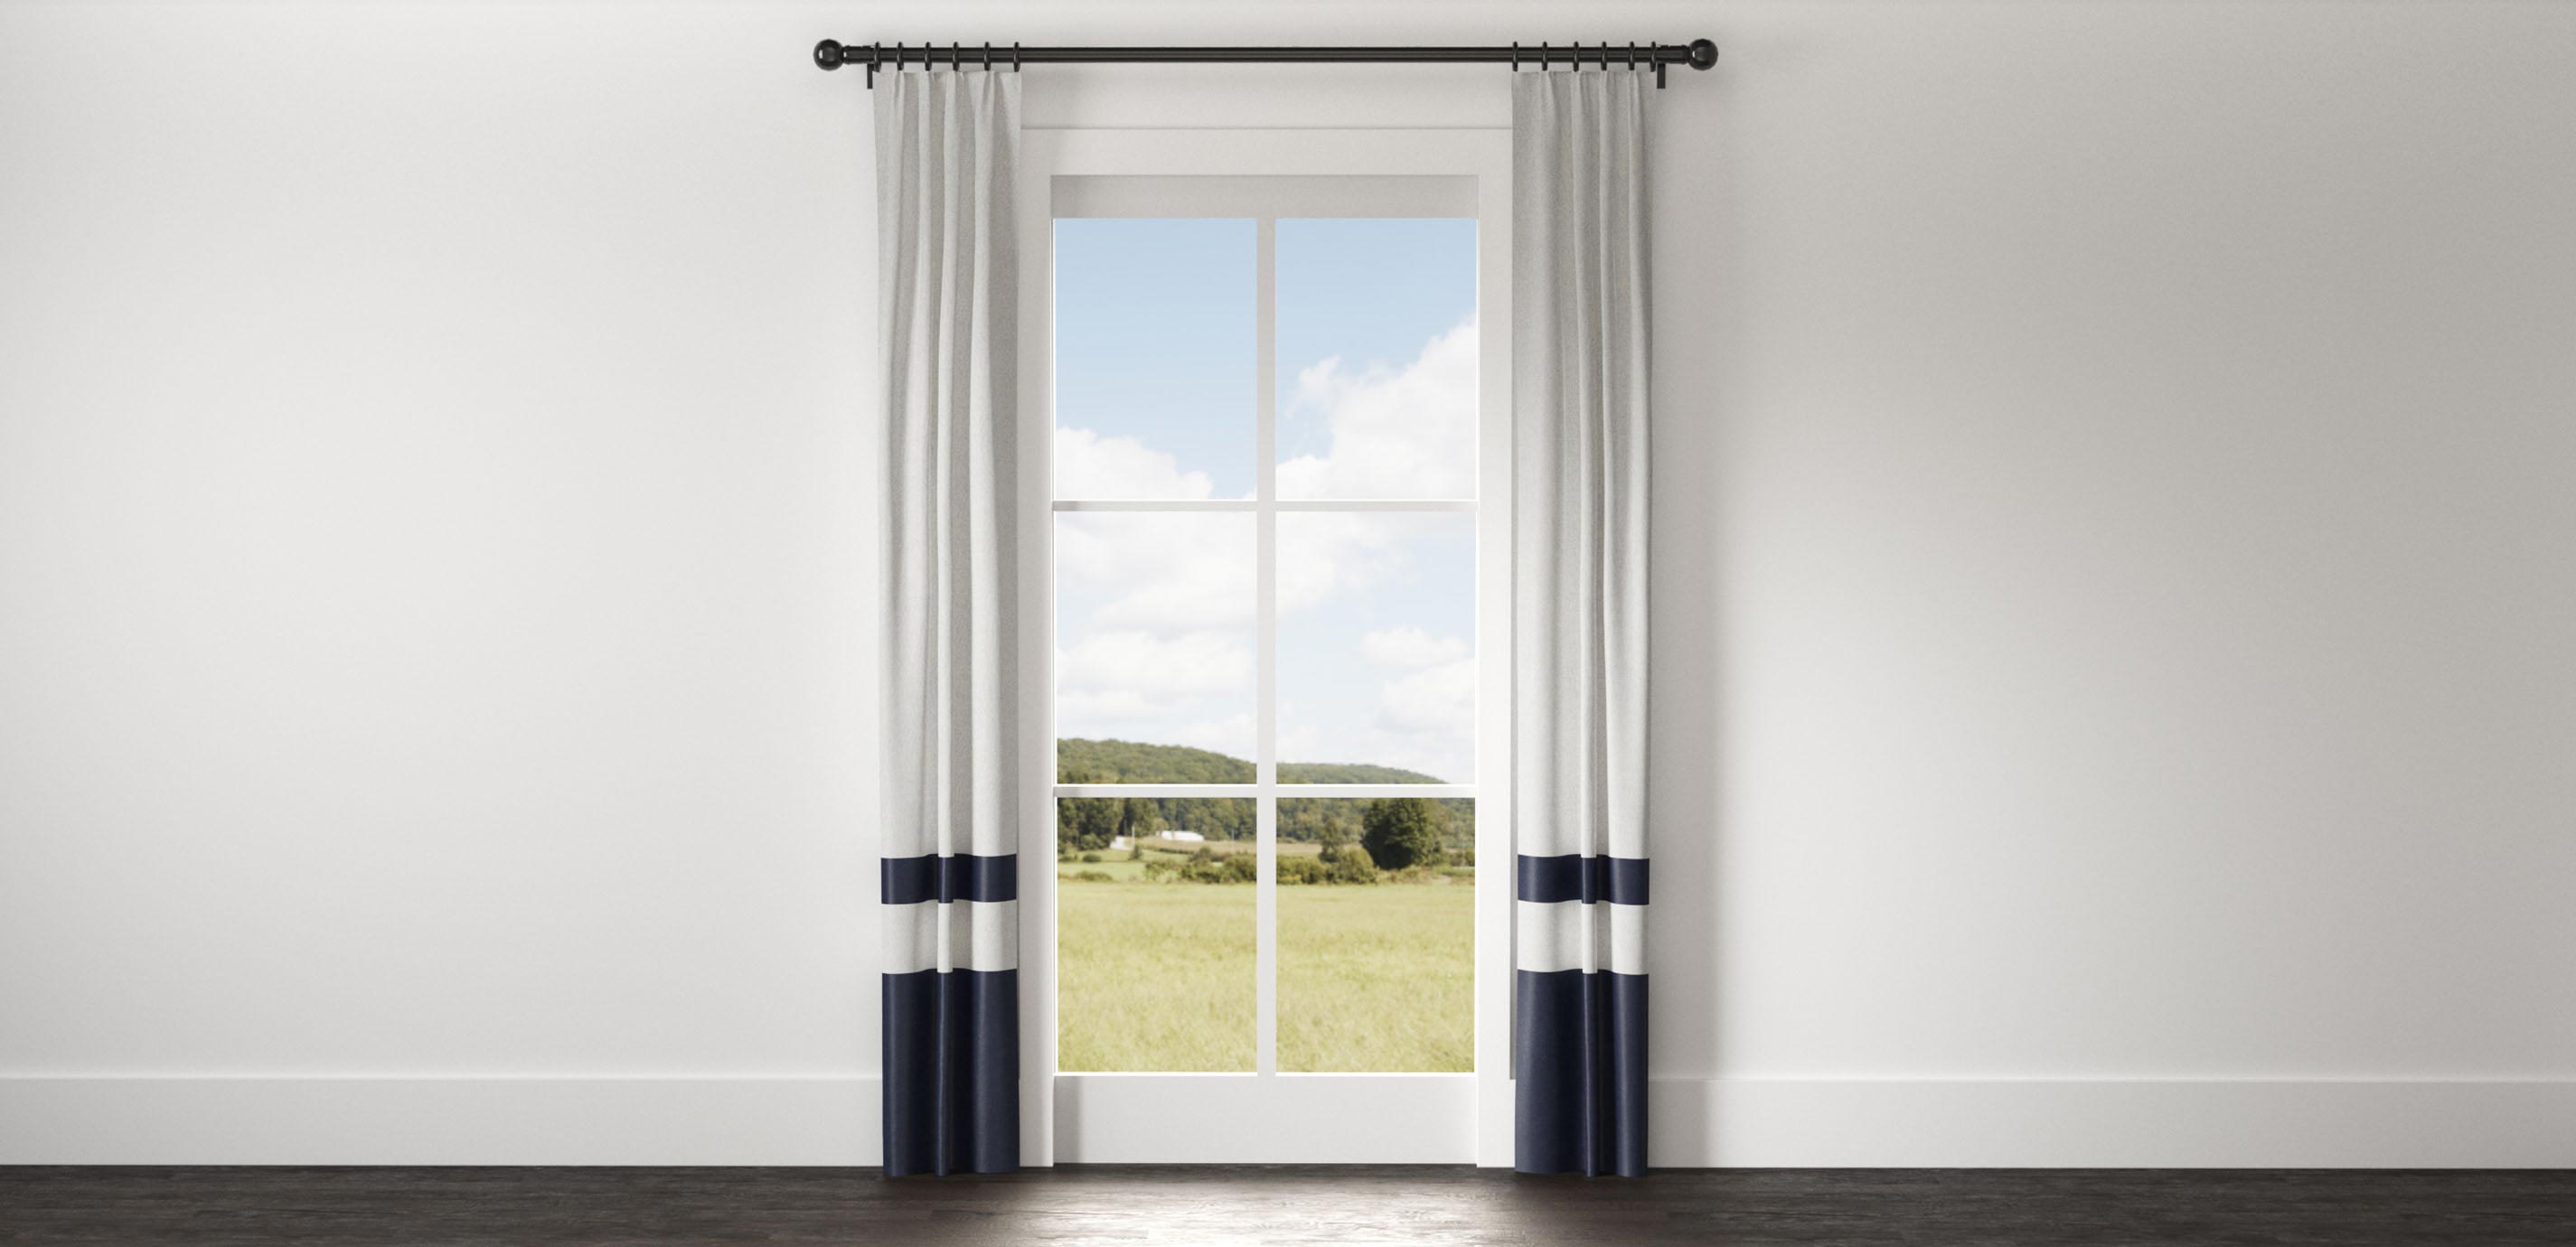 Curtains With Decorative Trims, Custom Draperies With Border Trim